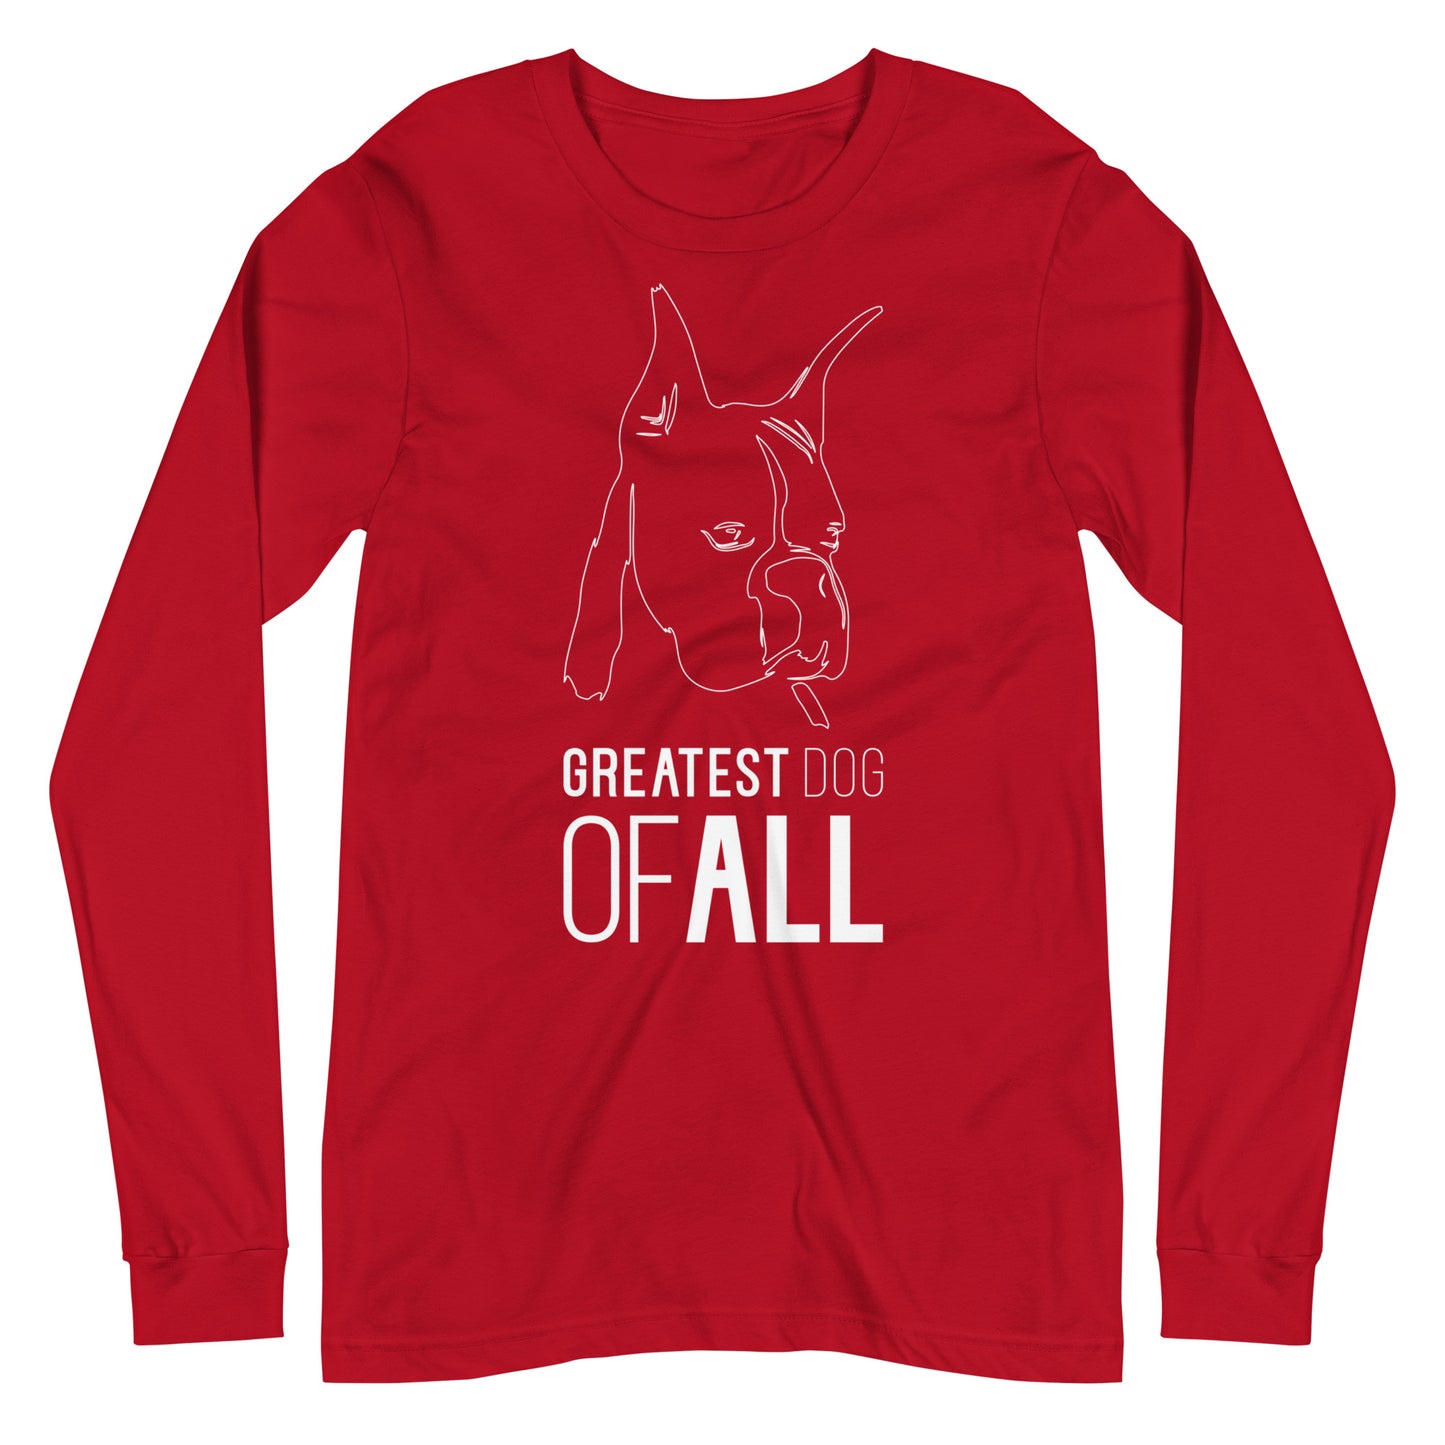 White line Boxer face with Greatest Dog of All caption on unisex red long sleeve t-shirt